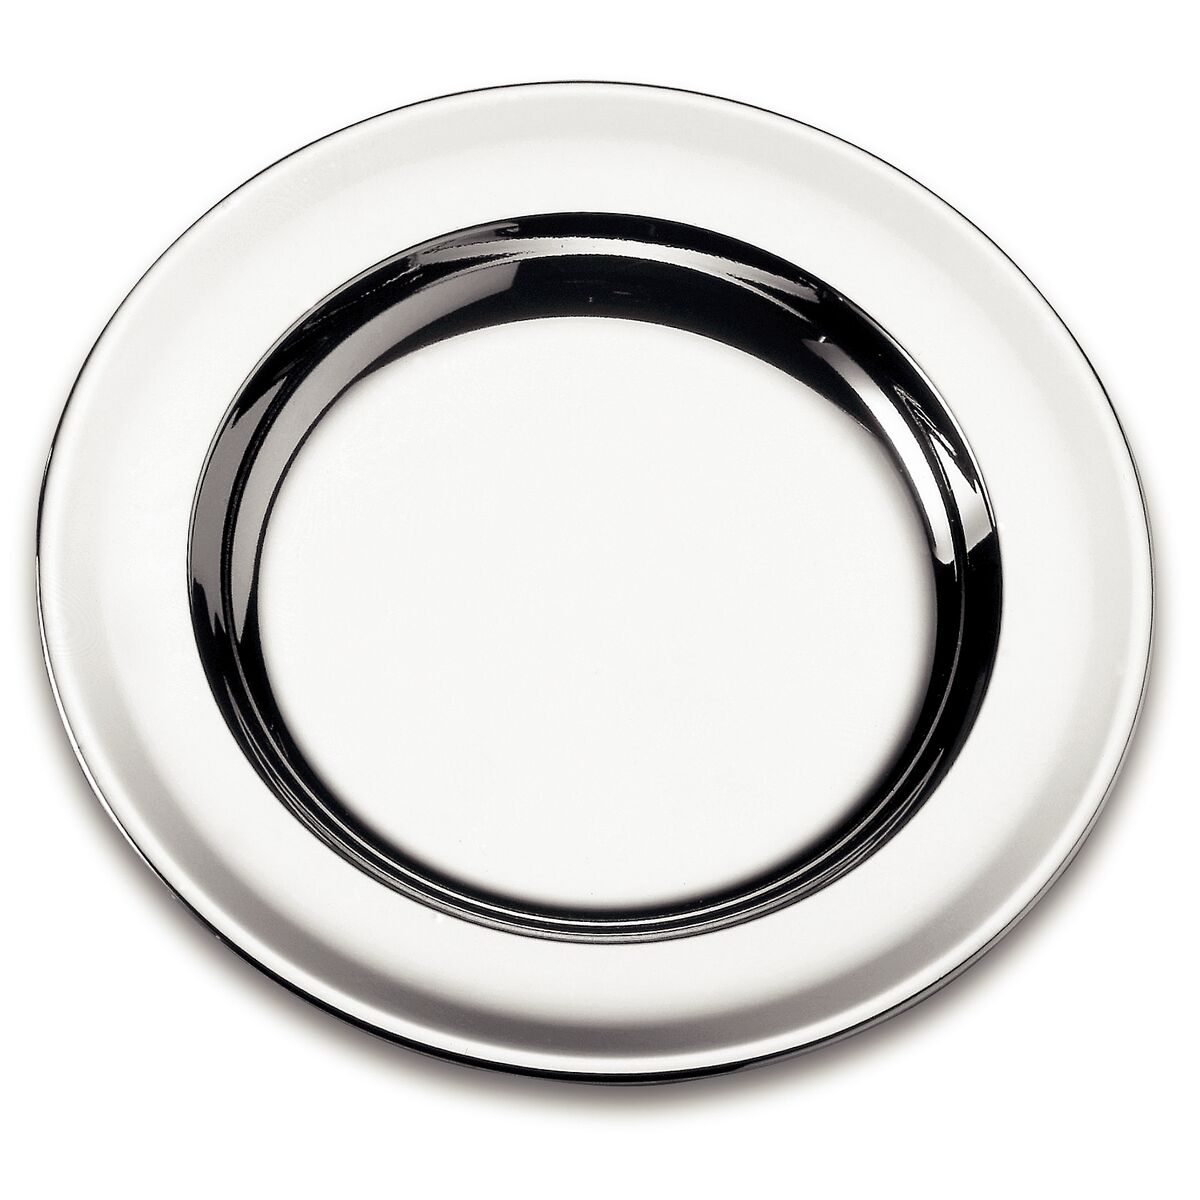 Tramontina Service 23 cm Flat Plate in Stainless Steel